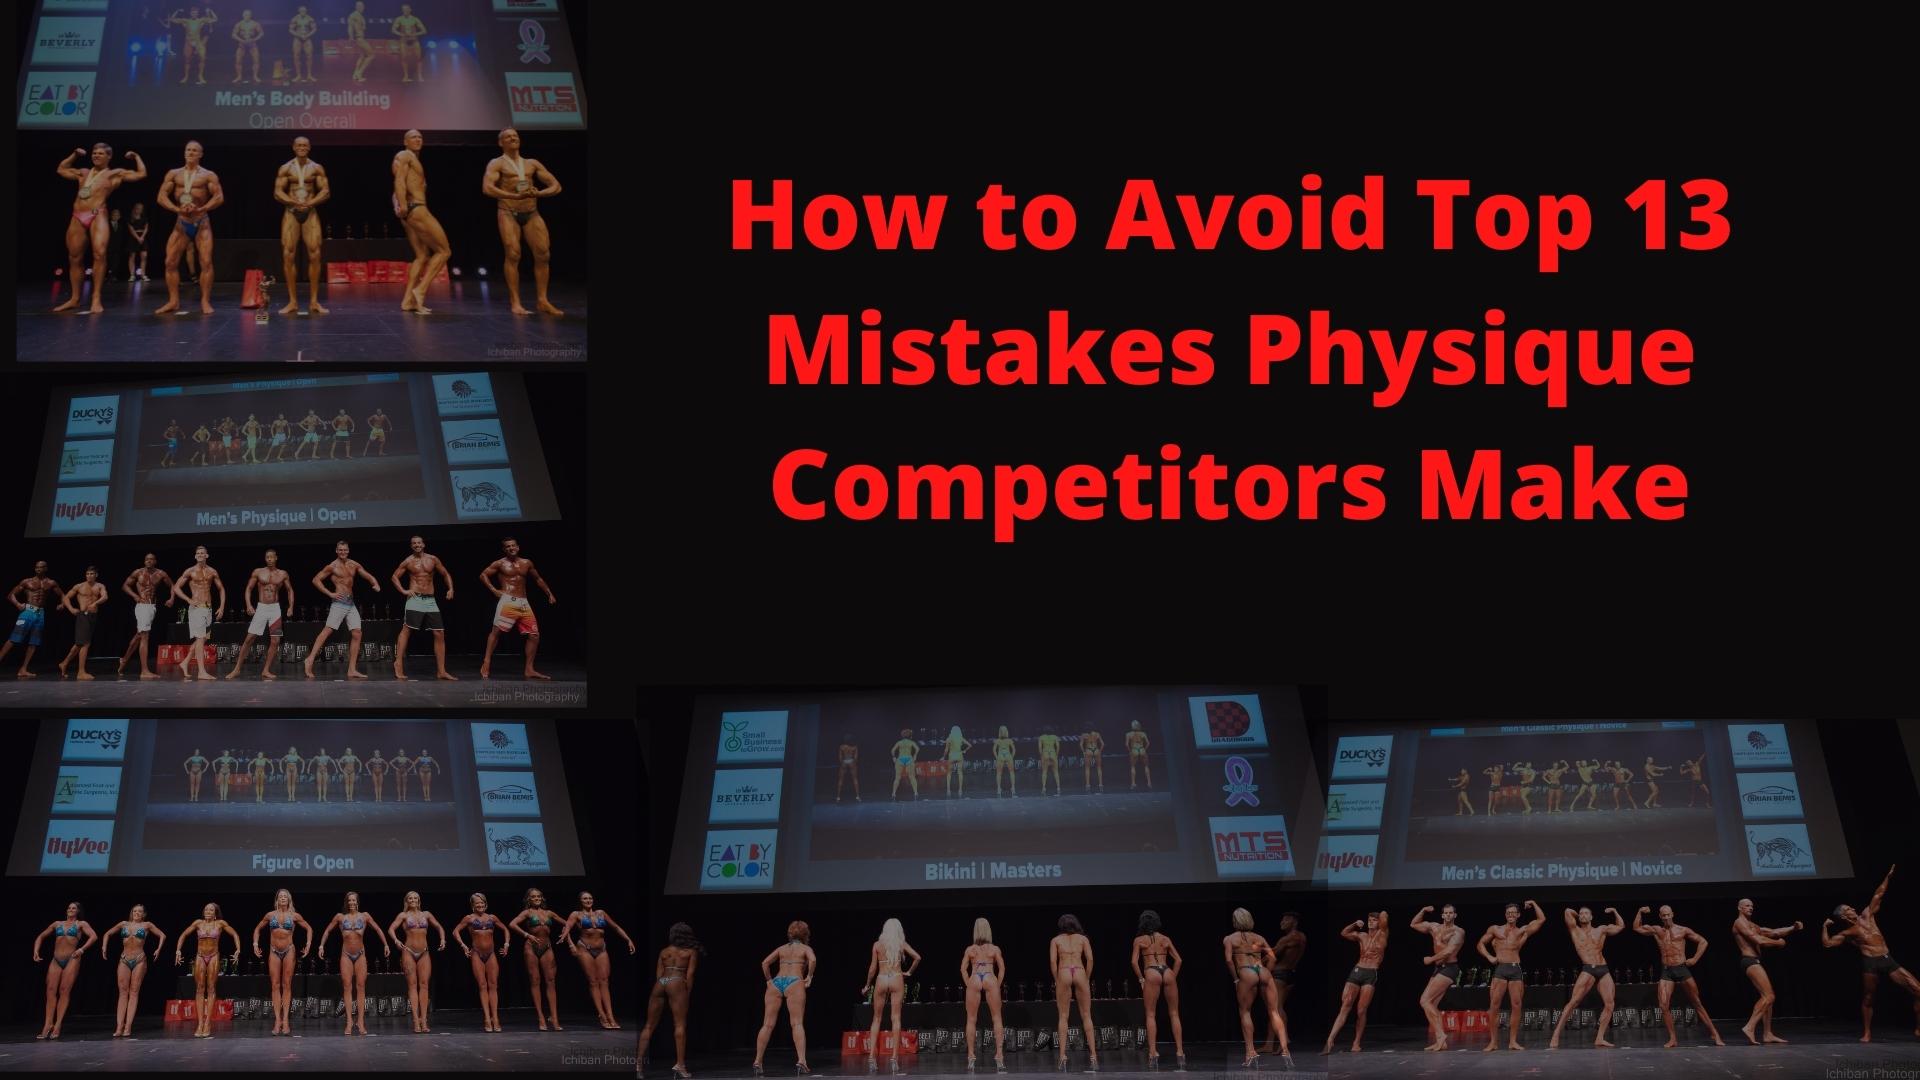 How to Avoid Top 13 Mistake Bodybuilders Make